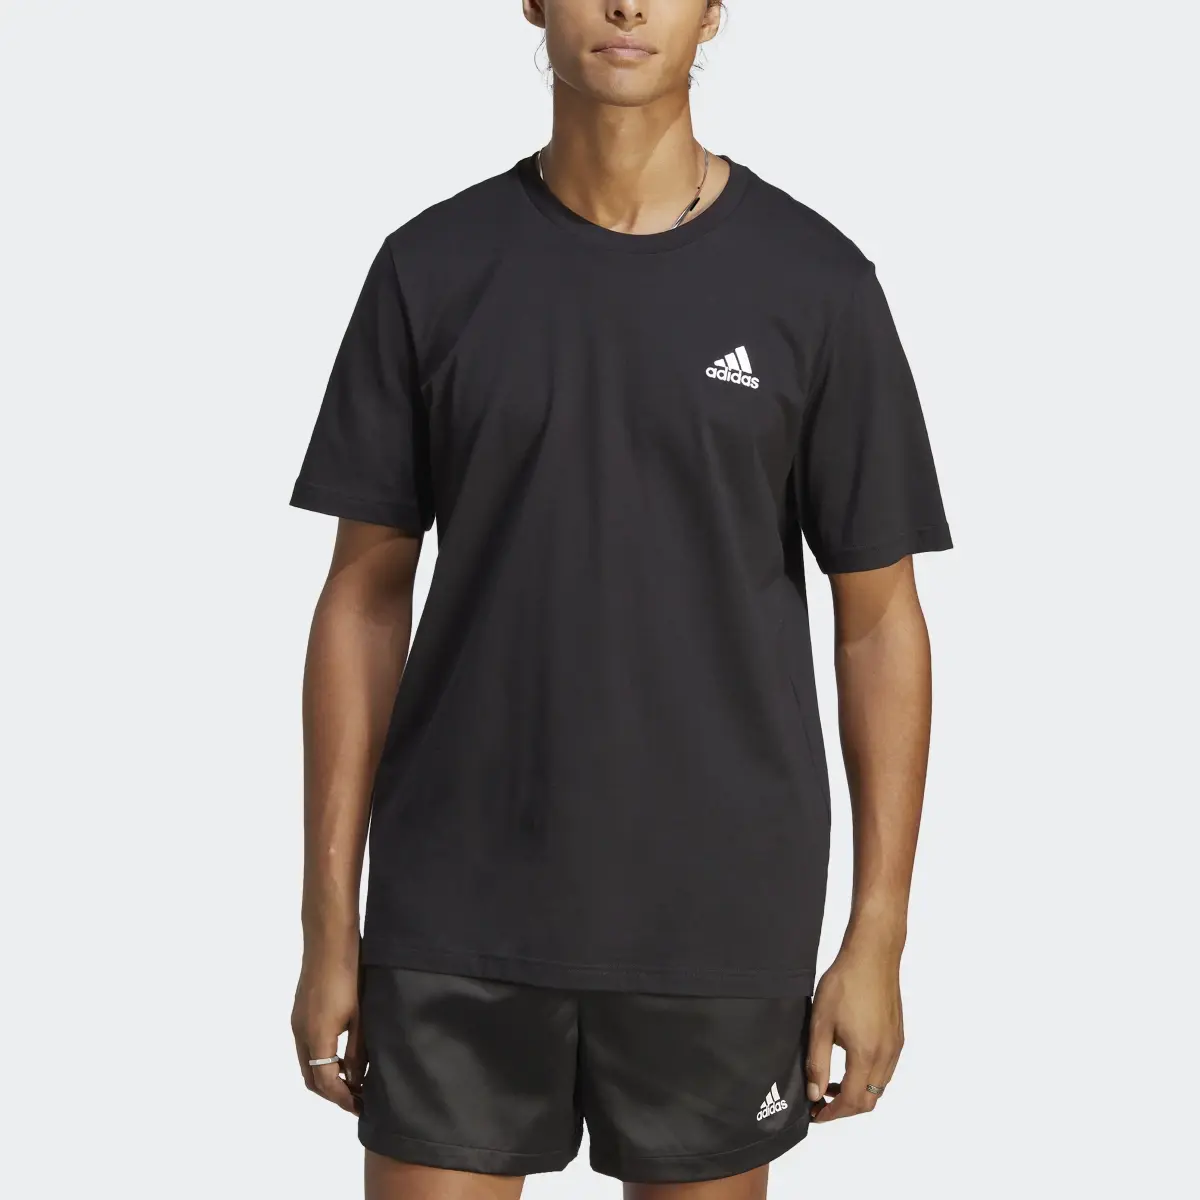 Adidas T-shirt Essentials Single Jersey Embroidered Small Logo. 1